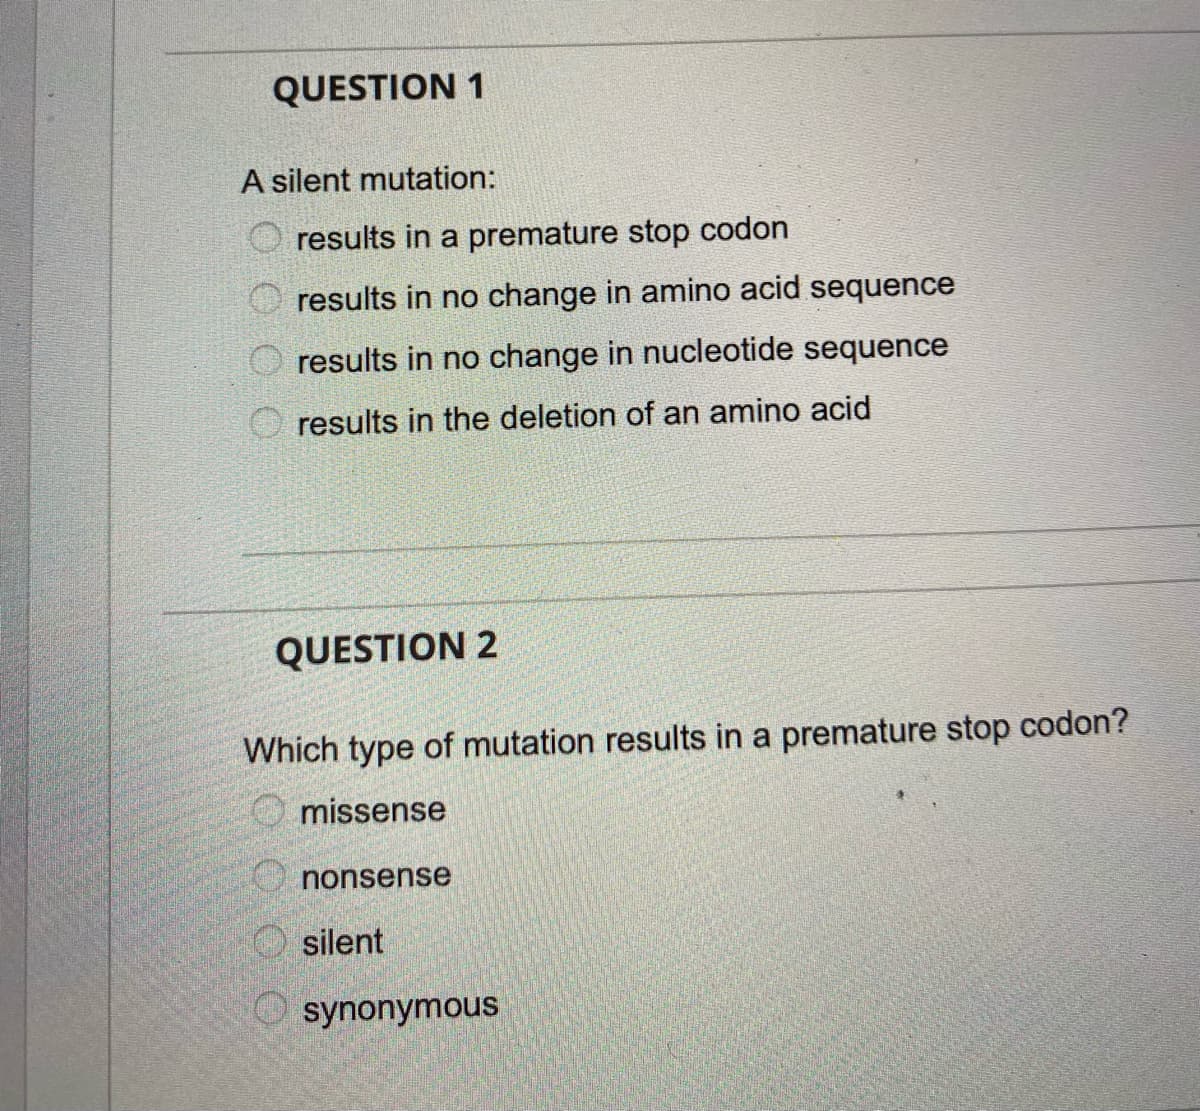 QUESTION 1
A silent mutation:
results in a premature stop codon
results in no change in amino acid sequence
results in no change in nucleotide sequence
O results in the deletion of an amino acid
QUESTION 2
Which type of mutation results in a premature stop codon?
missense
O nonsense
O silent
synonymous
O O O O
